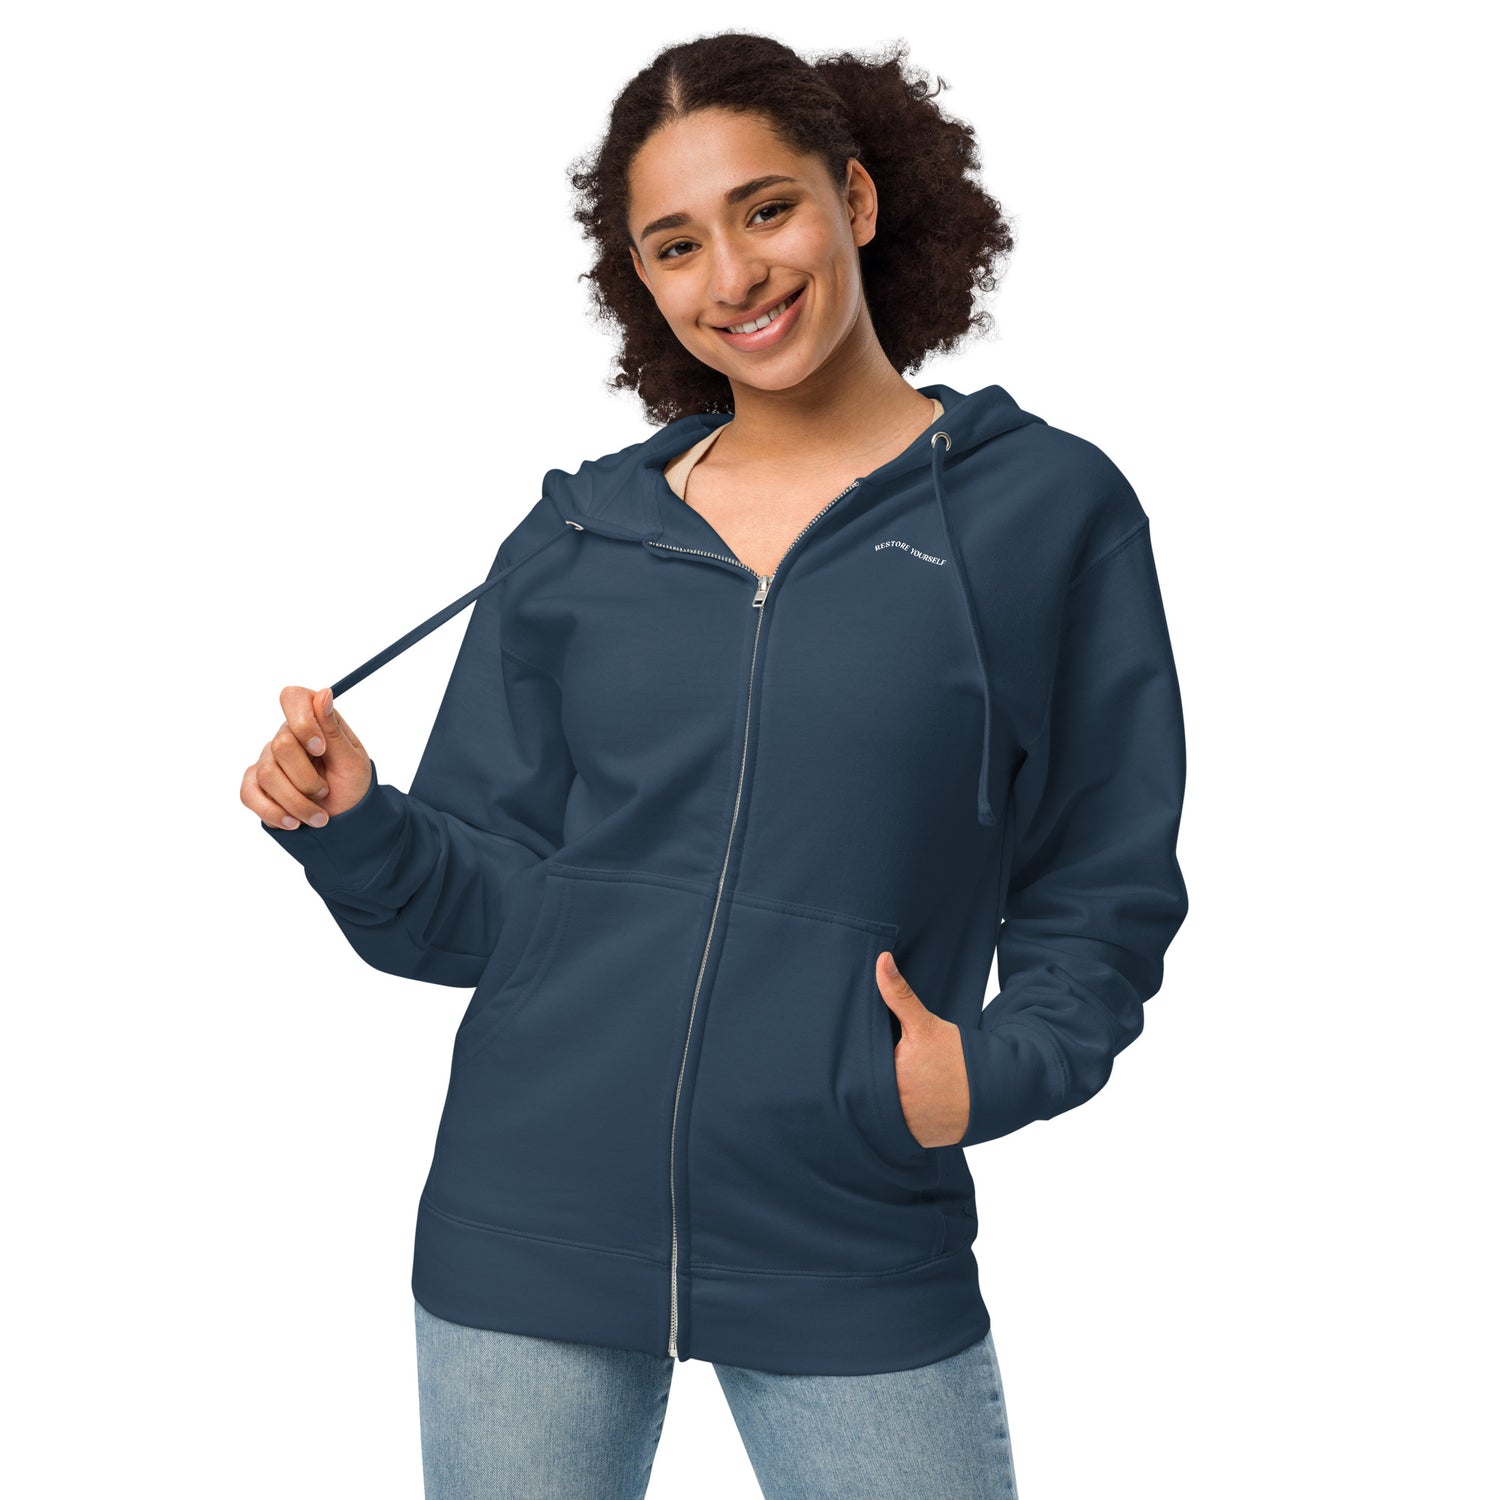 A woman wearing a Navy zip up hoodie with a "RESTORE YOURSELF" printed on chest.